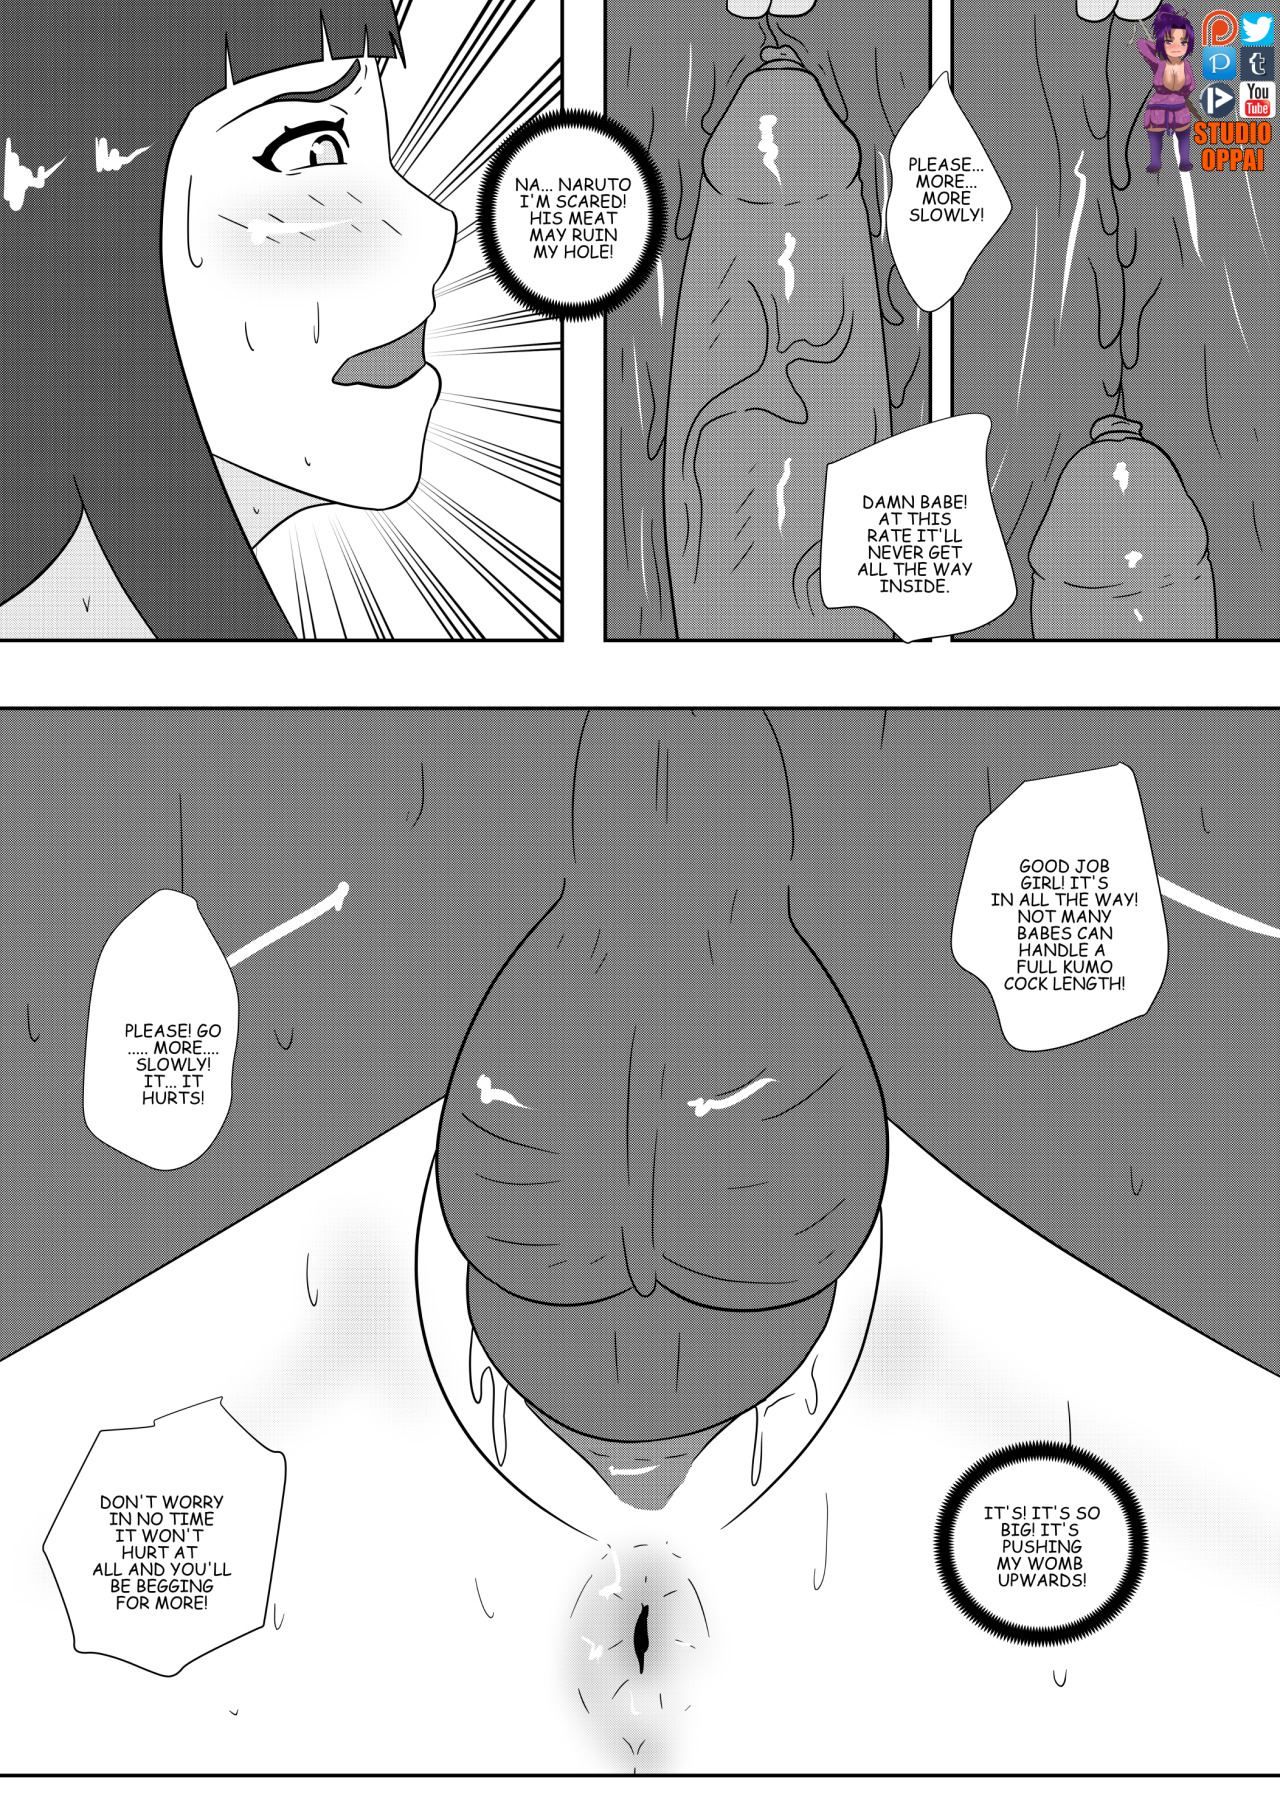 Size Does Matter After All Naruto by Studio Oppai page 7